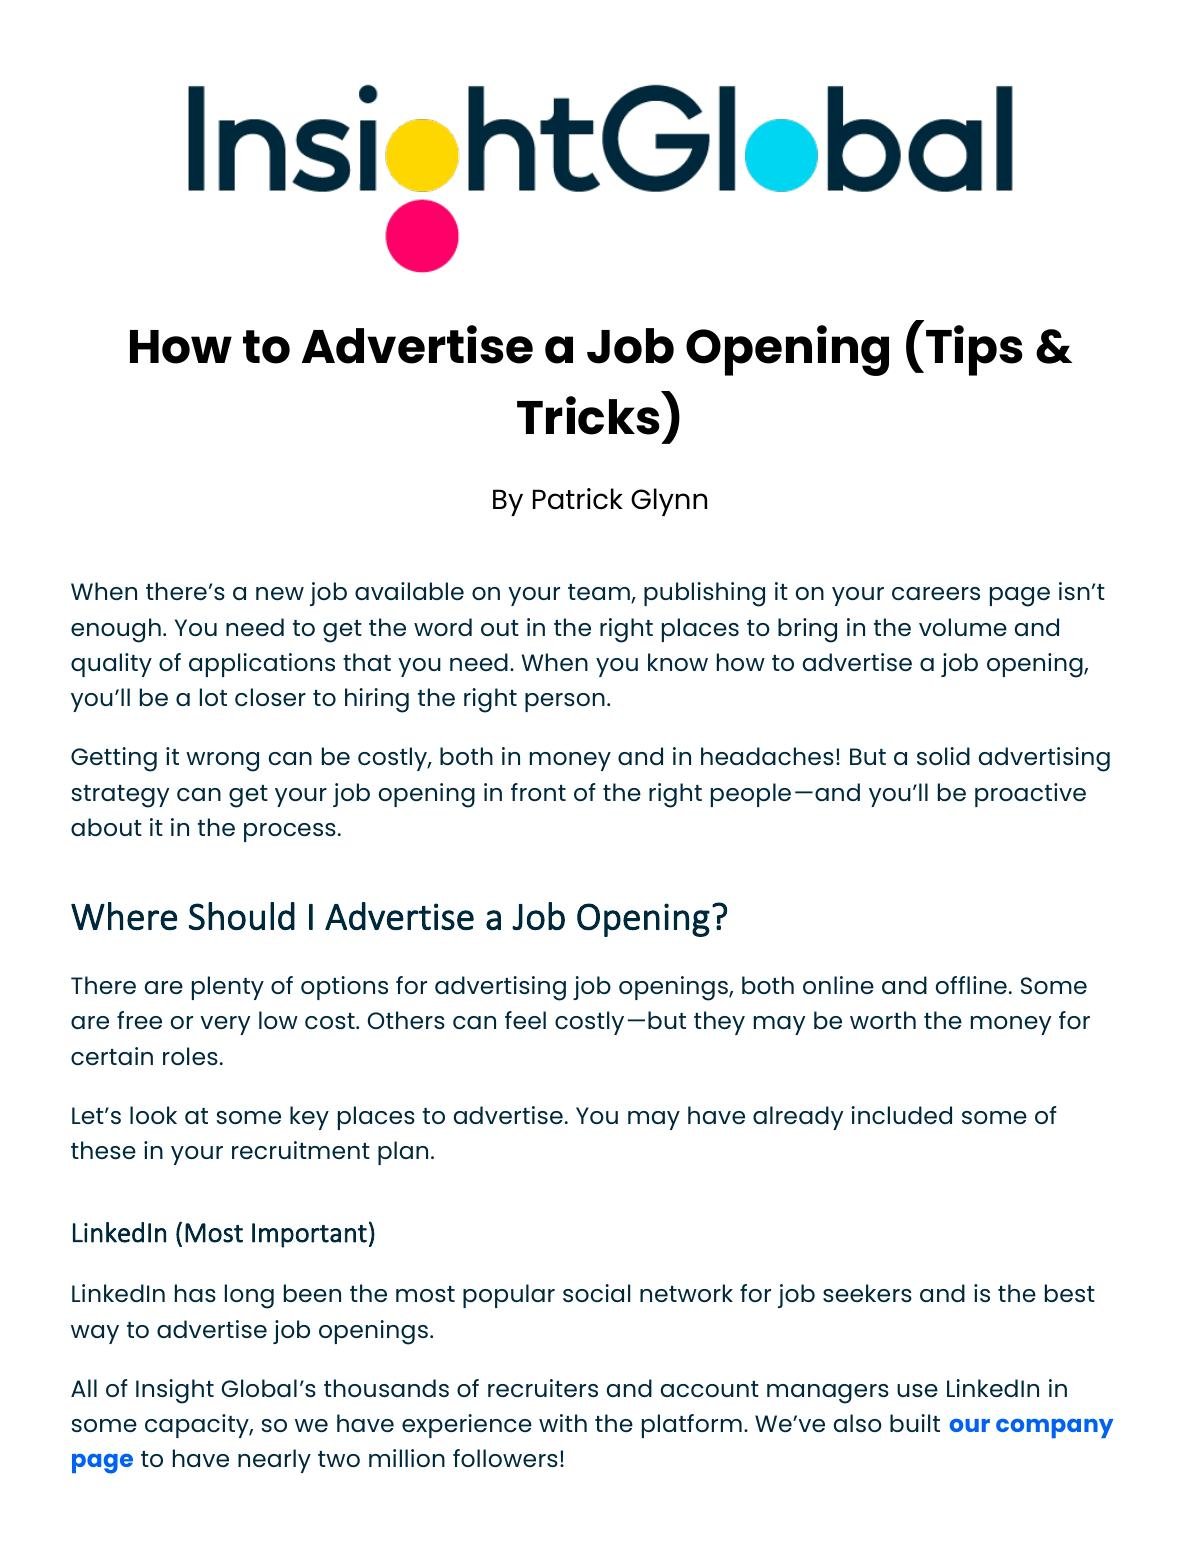 How to Advertise a Job Opening (Tips & Tricks)